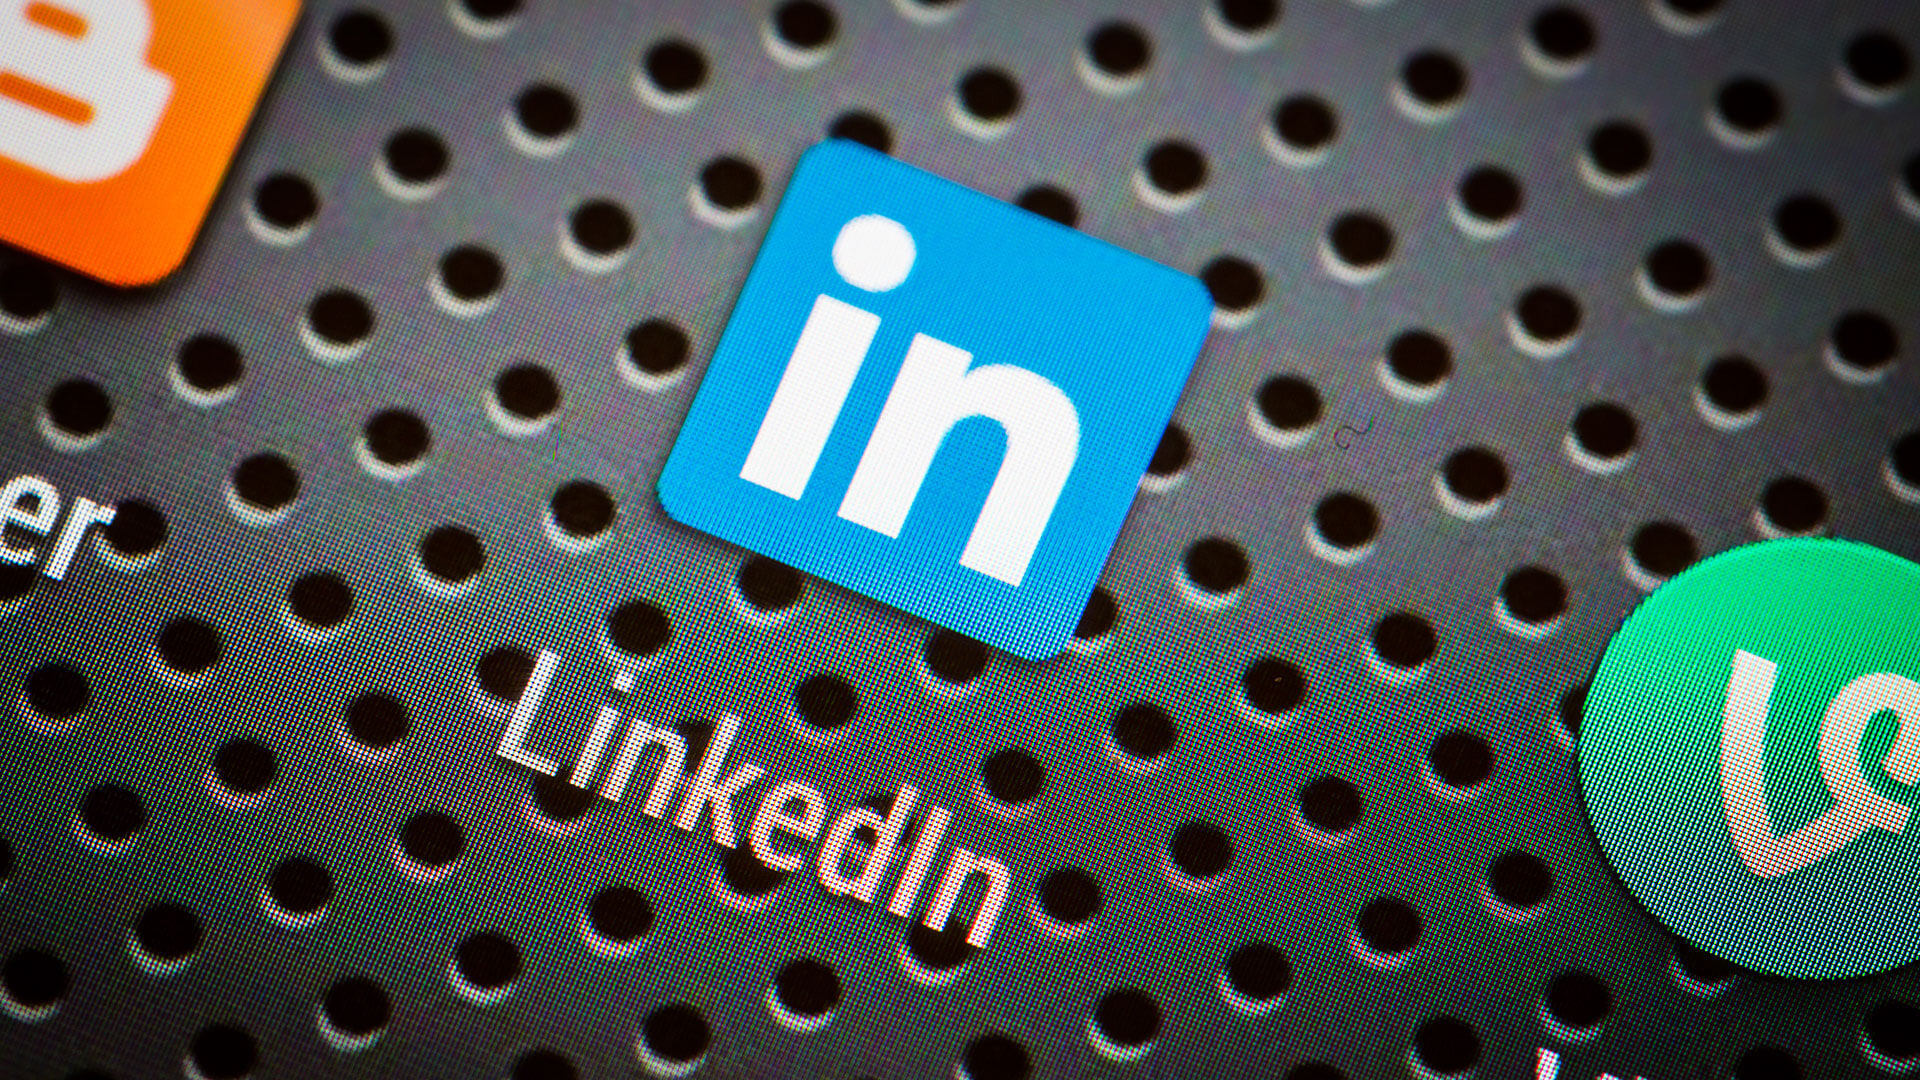 #LinkedIn introduces CTV ads for B2B campaigns